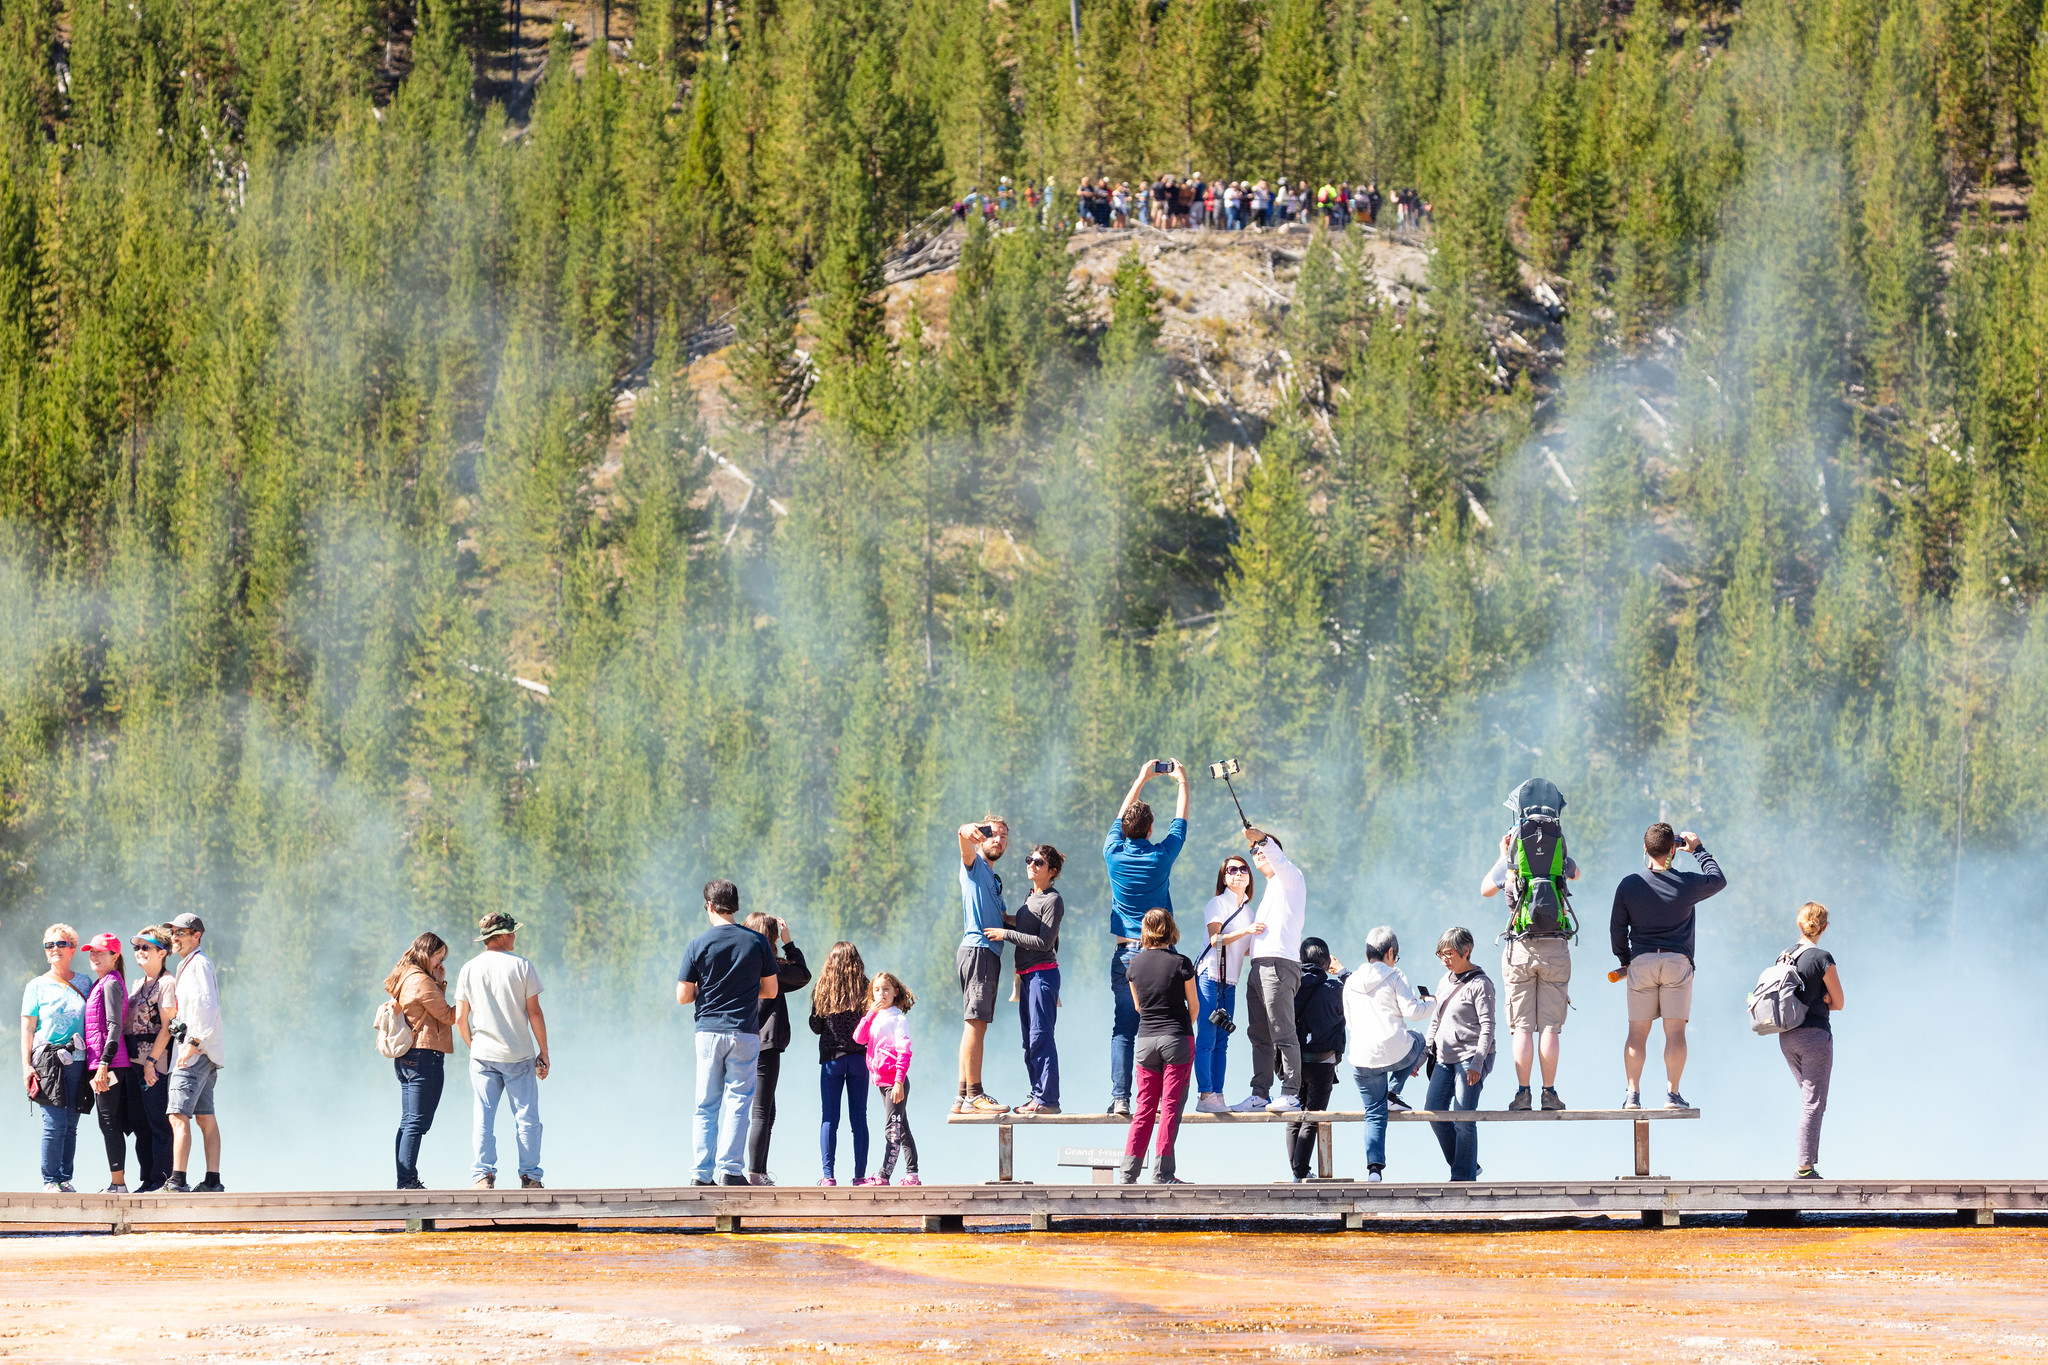 research papers on yellowstone national park